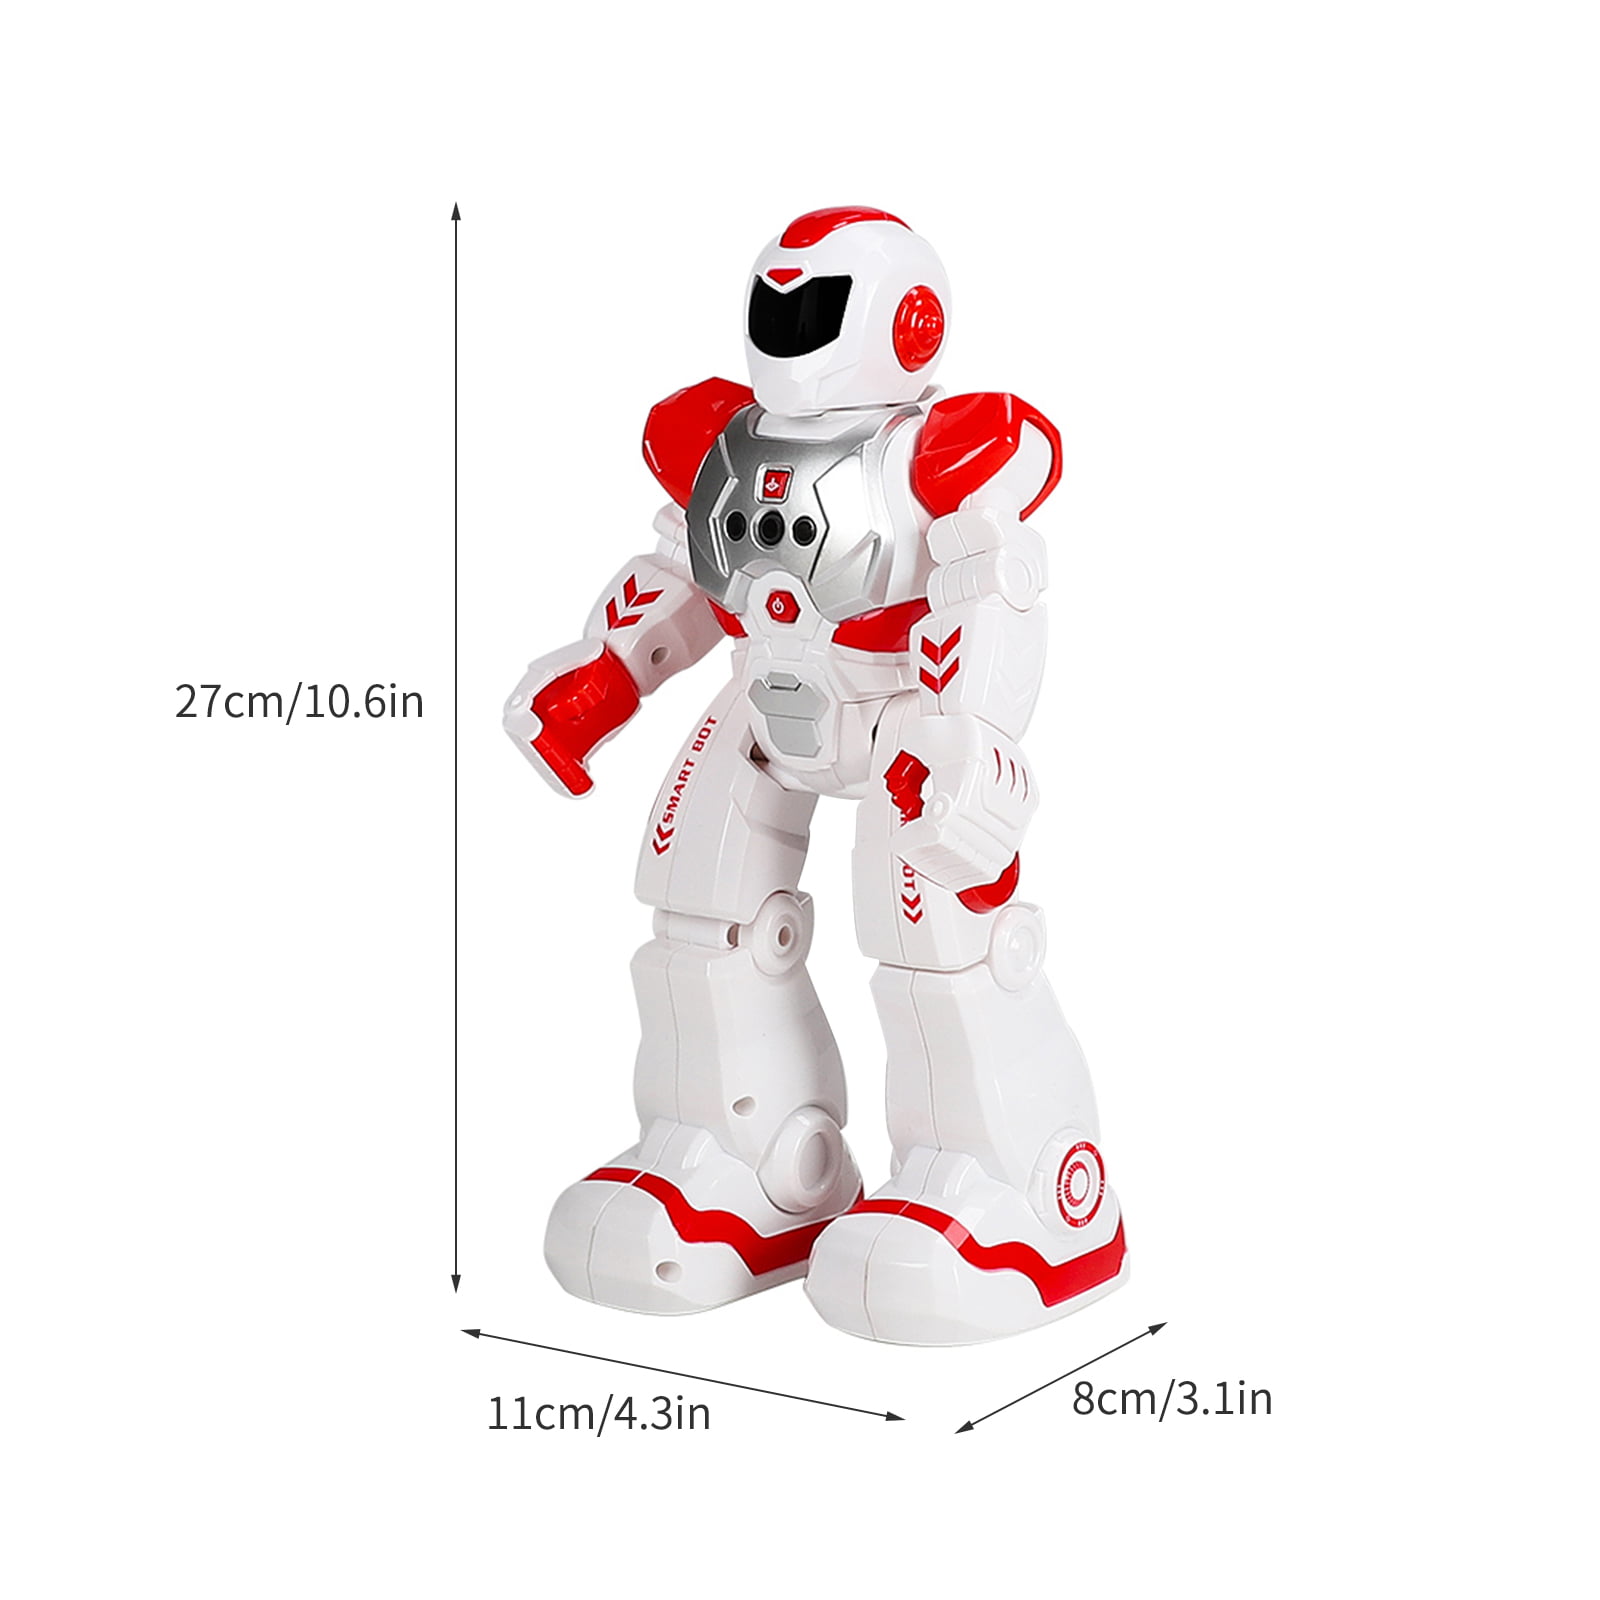 Smart RC Robot Toy for Kids, Gesture Sensing Dancing Robot for Boys Girls,  Smart Remote Control Robot Programmable Robotic Toy Gif